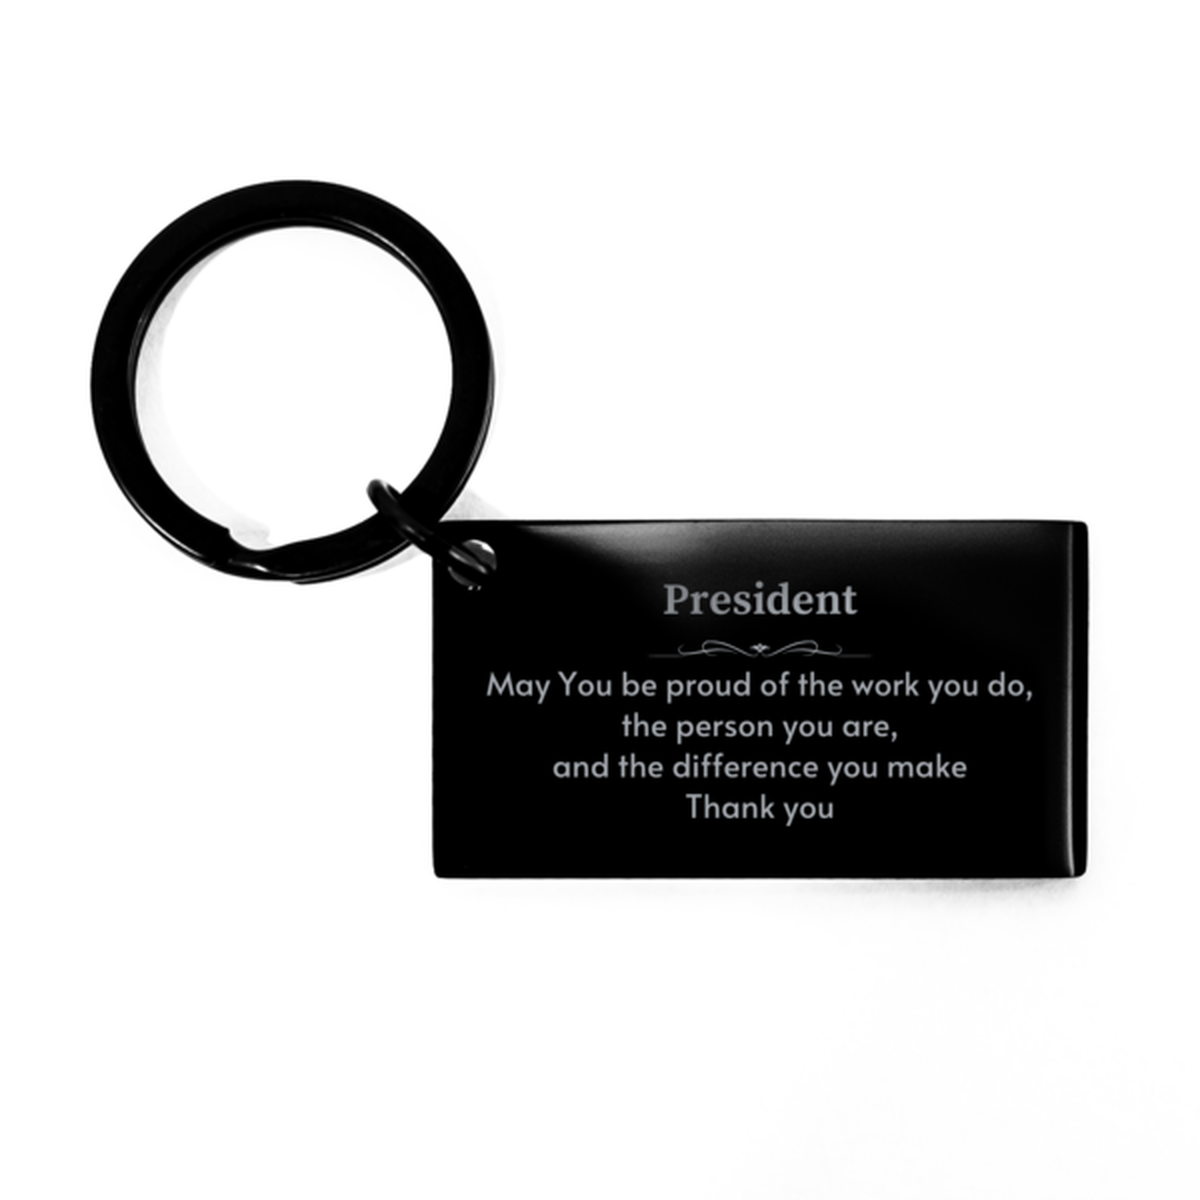 Heartwarming Keychain Retirement Coworkers Gifts for President, Shampooer May You be proud of the work you do, the person you are Gifts for Boss Men Women Friends